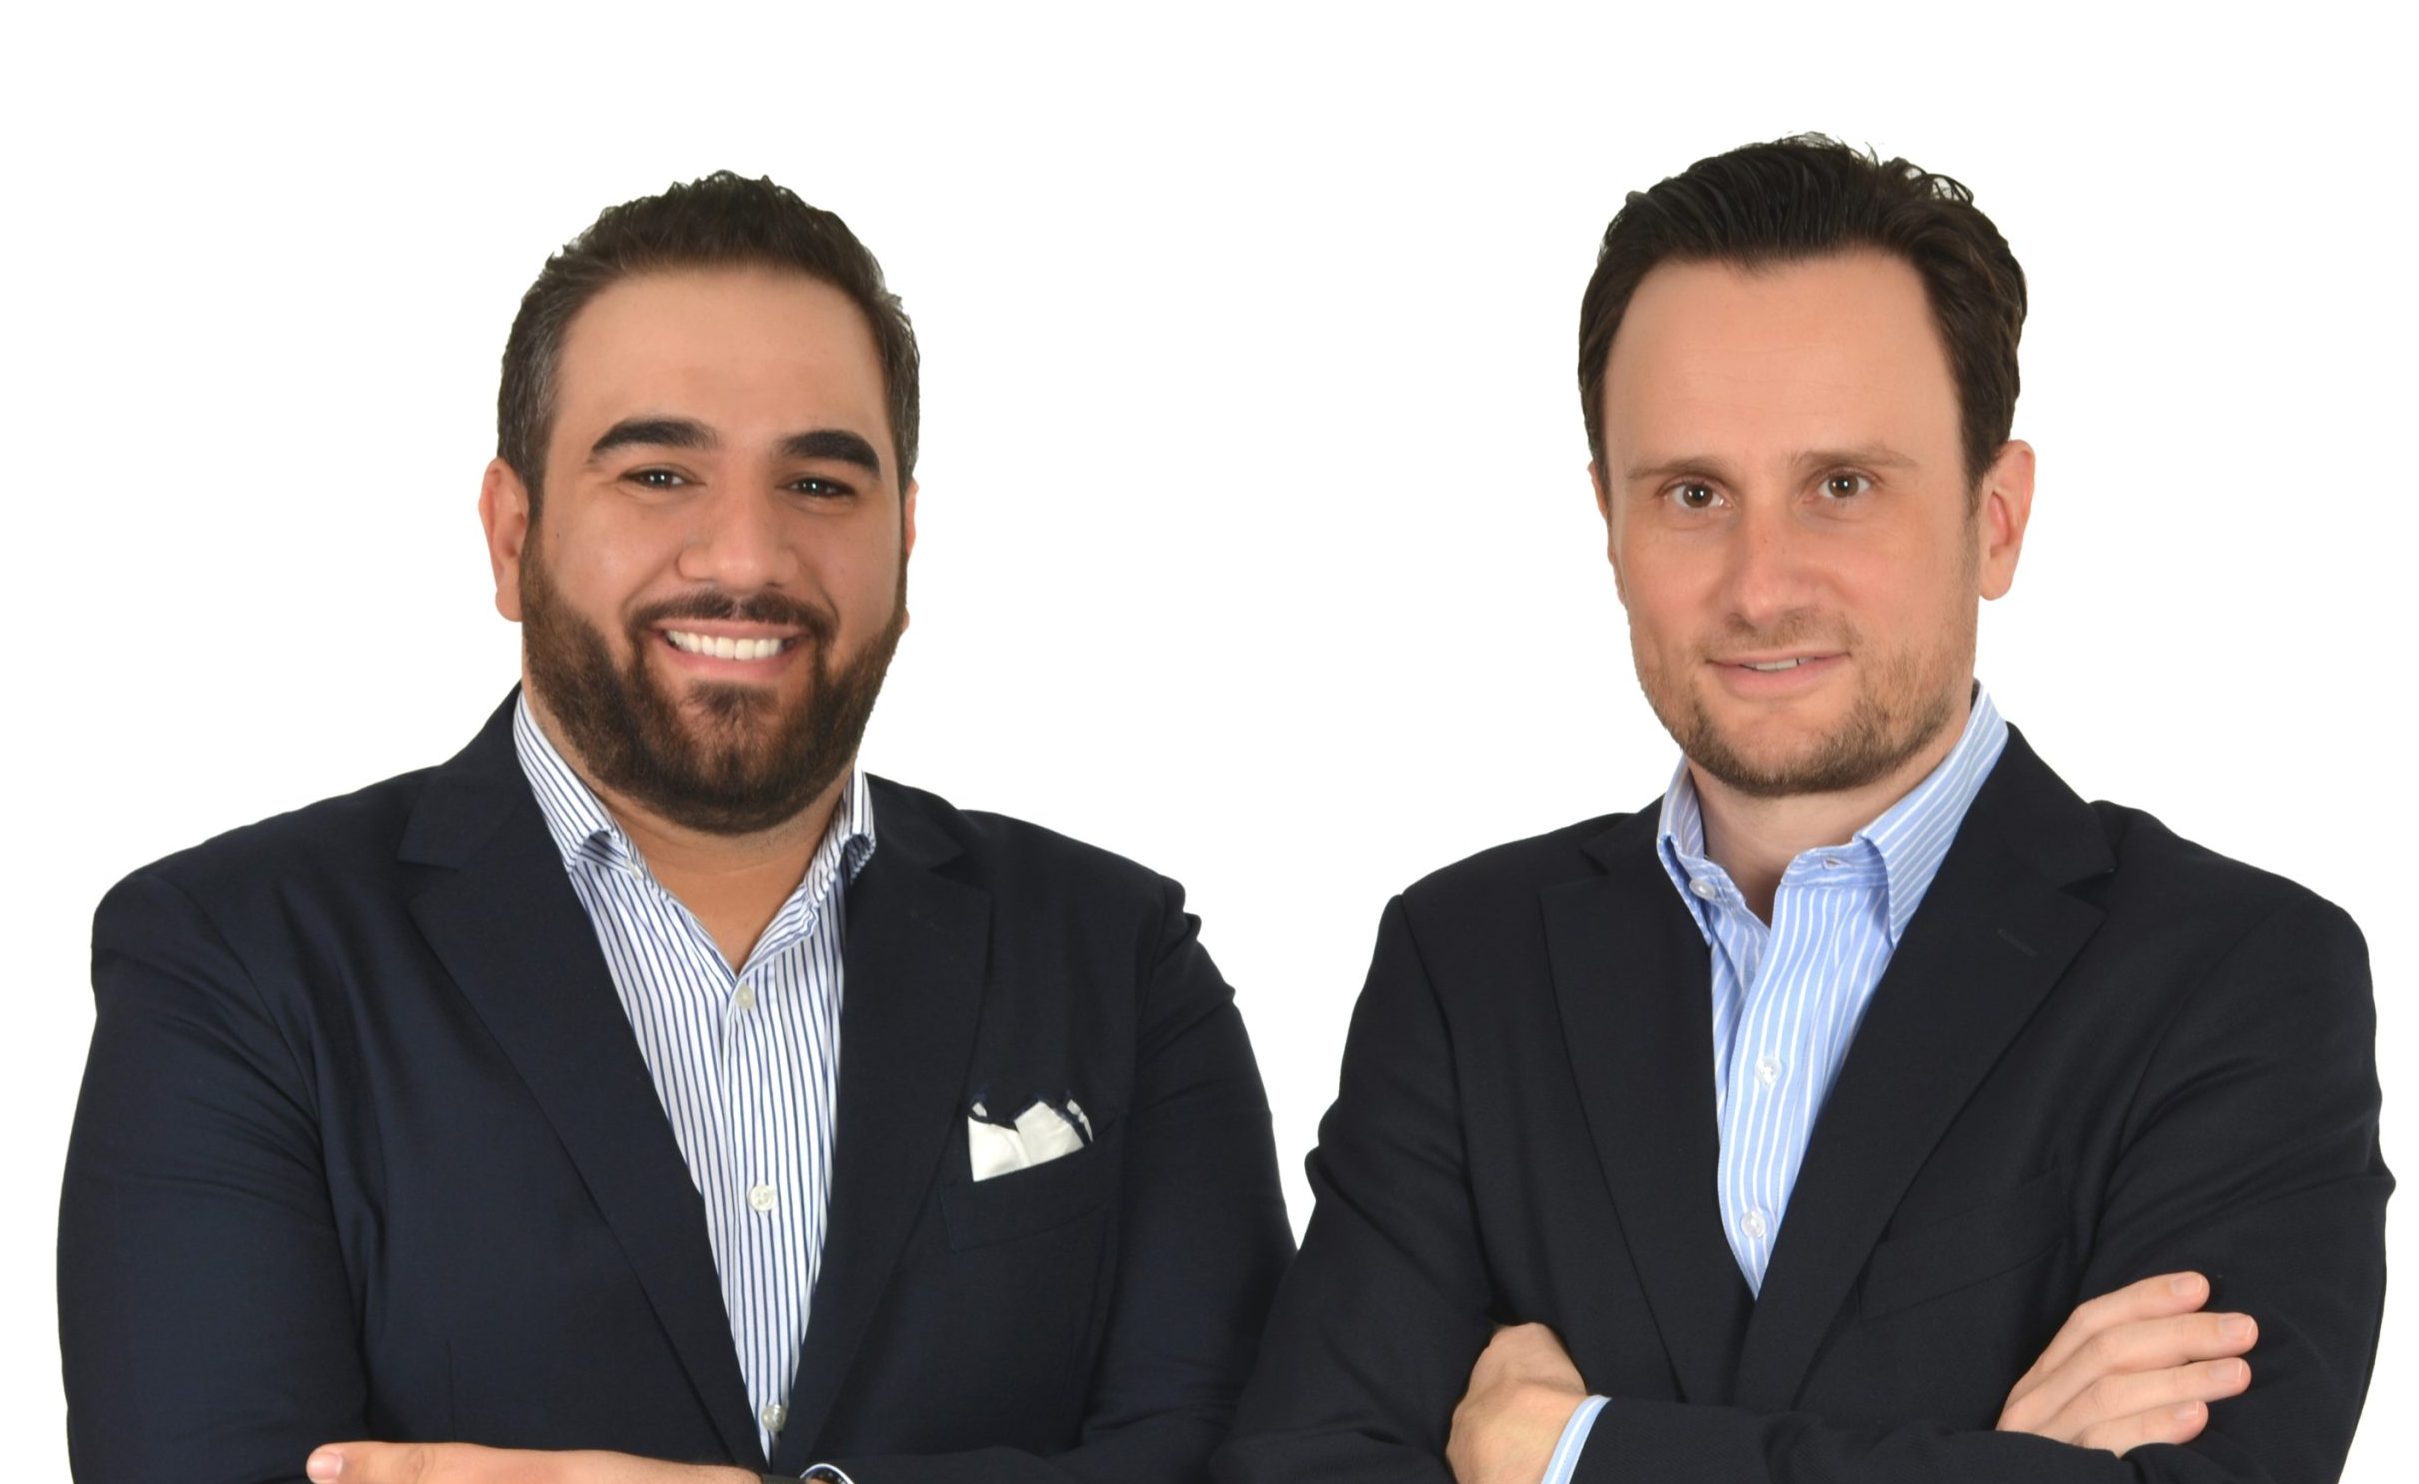 (L-R) FlexxPay Founders Charbel Nasr and Michael Truschler